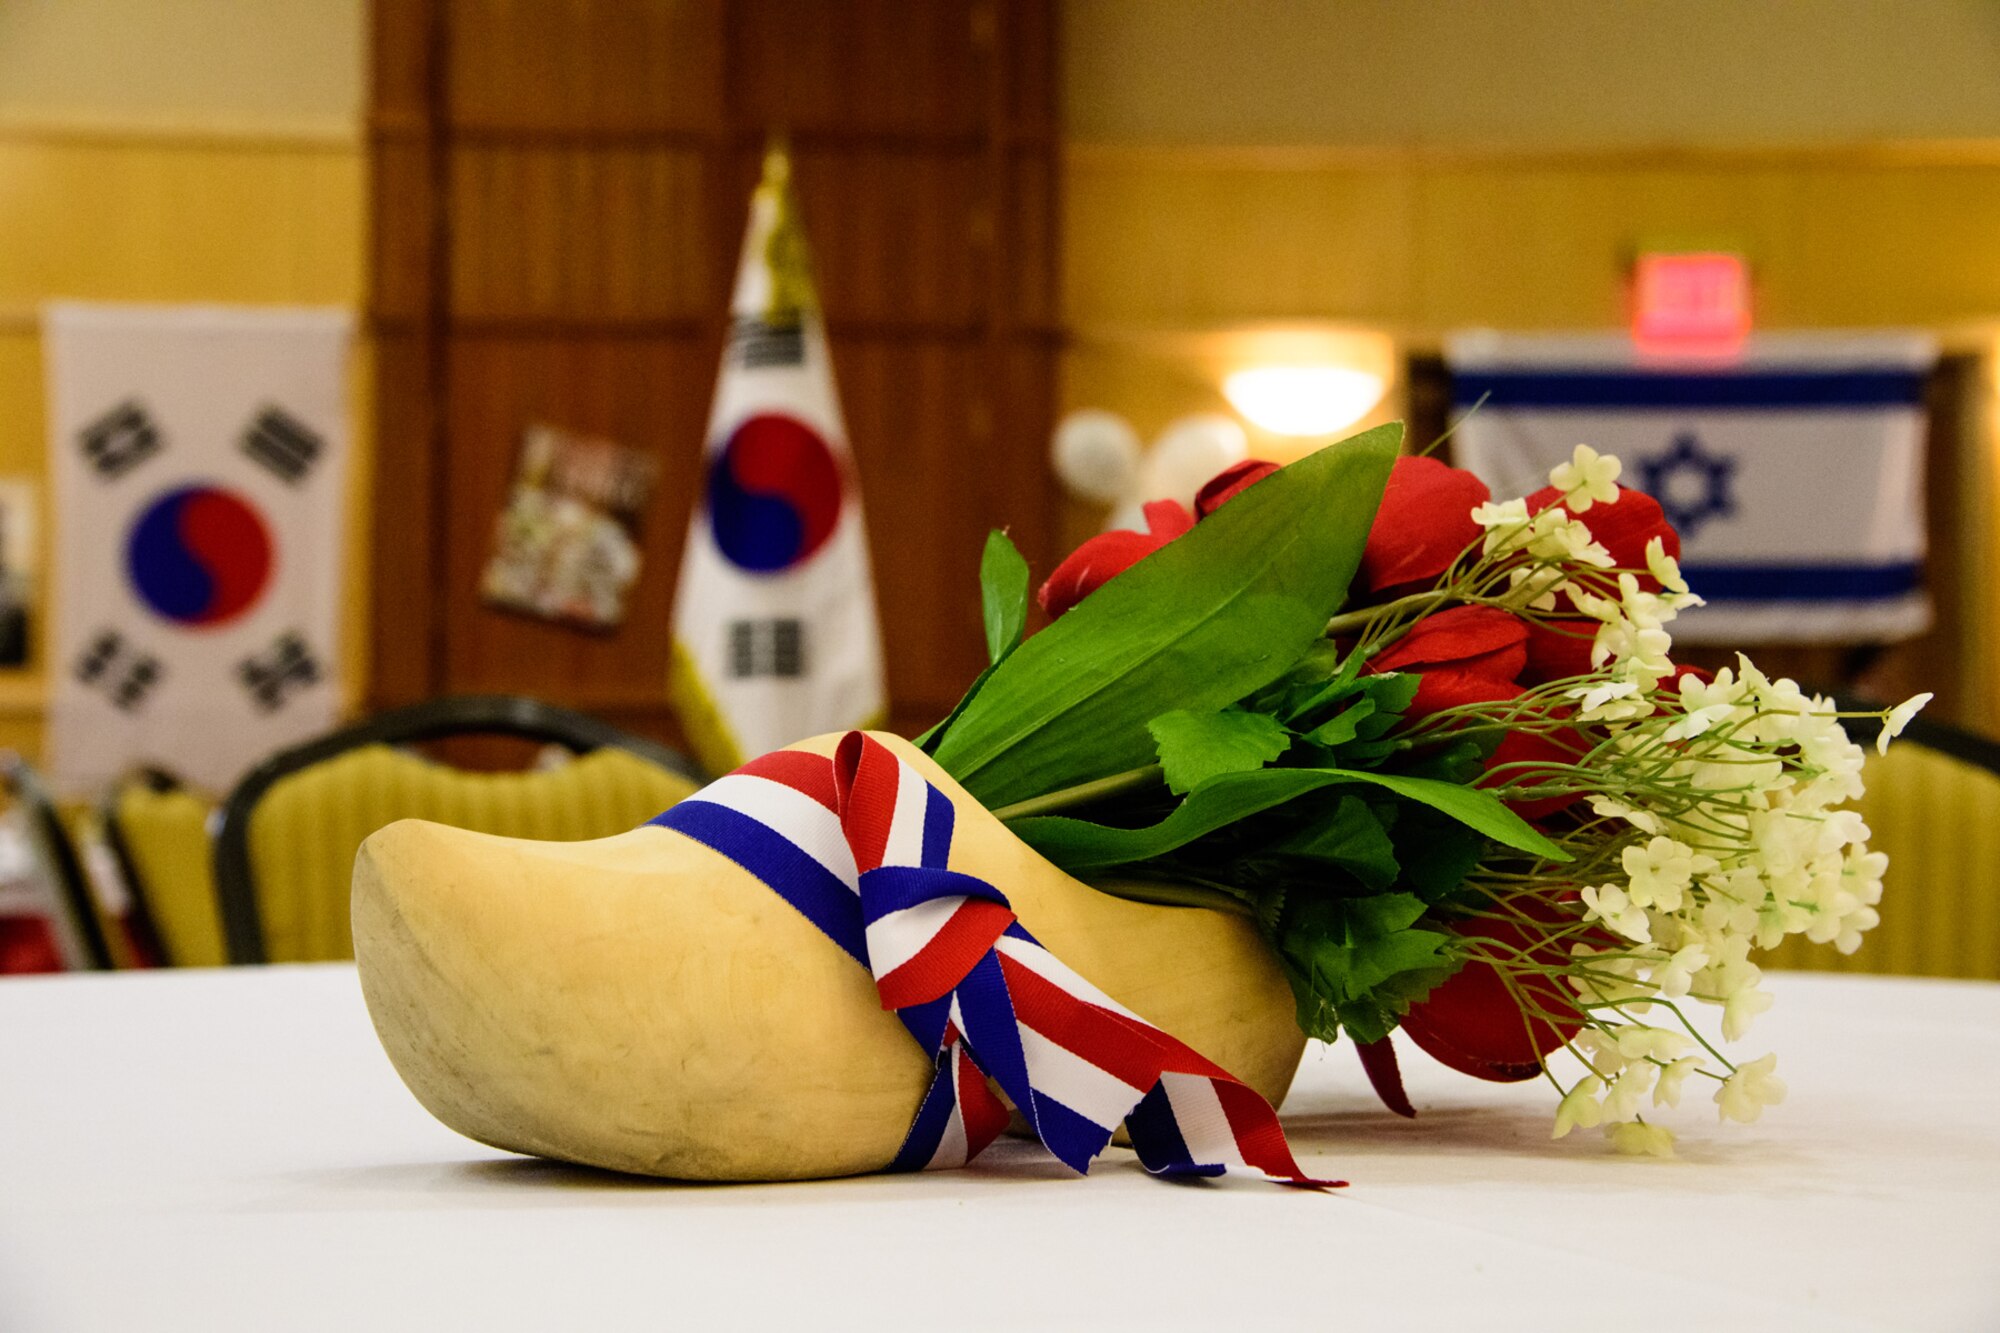 A Dutch wooden shoe wrapped in the colors of the flag of the Netherlands serves as a table centerpiece during the International Buffet at Hill Air Force Base, Utah, March 1, 2017. The annual event offered guests food from 12 countries. (U.S. Air Force photo/R. Nial Bradshaw)